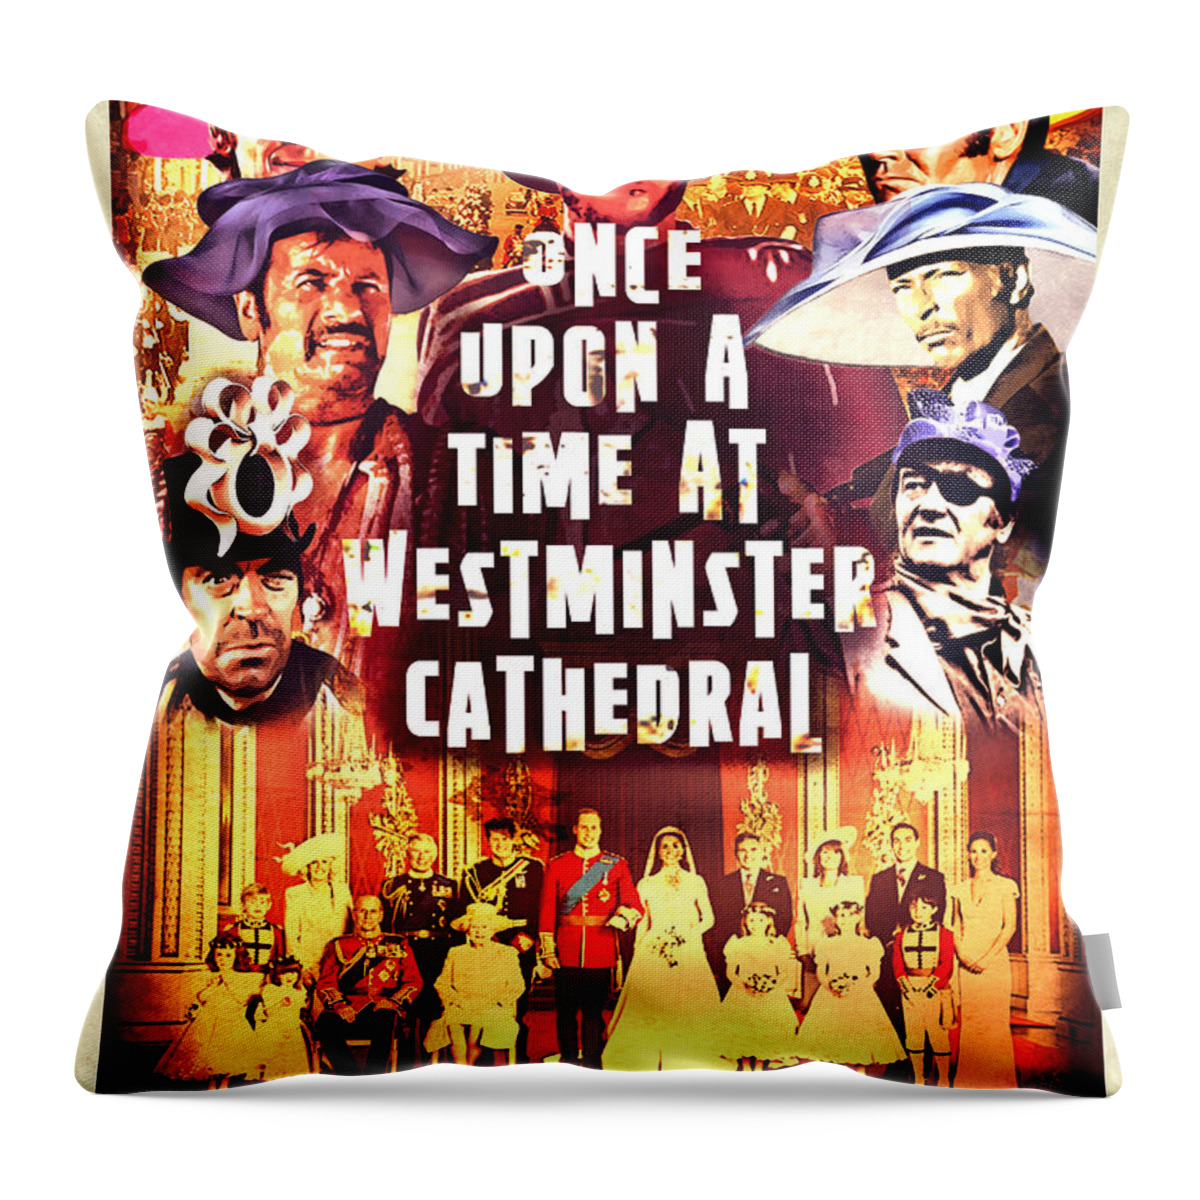 Royal Wedding Throw Pillow featuring the digital art Once Upon A Time by Mark Armstrong